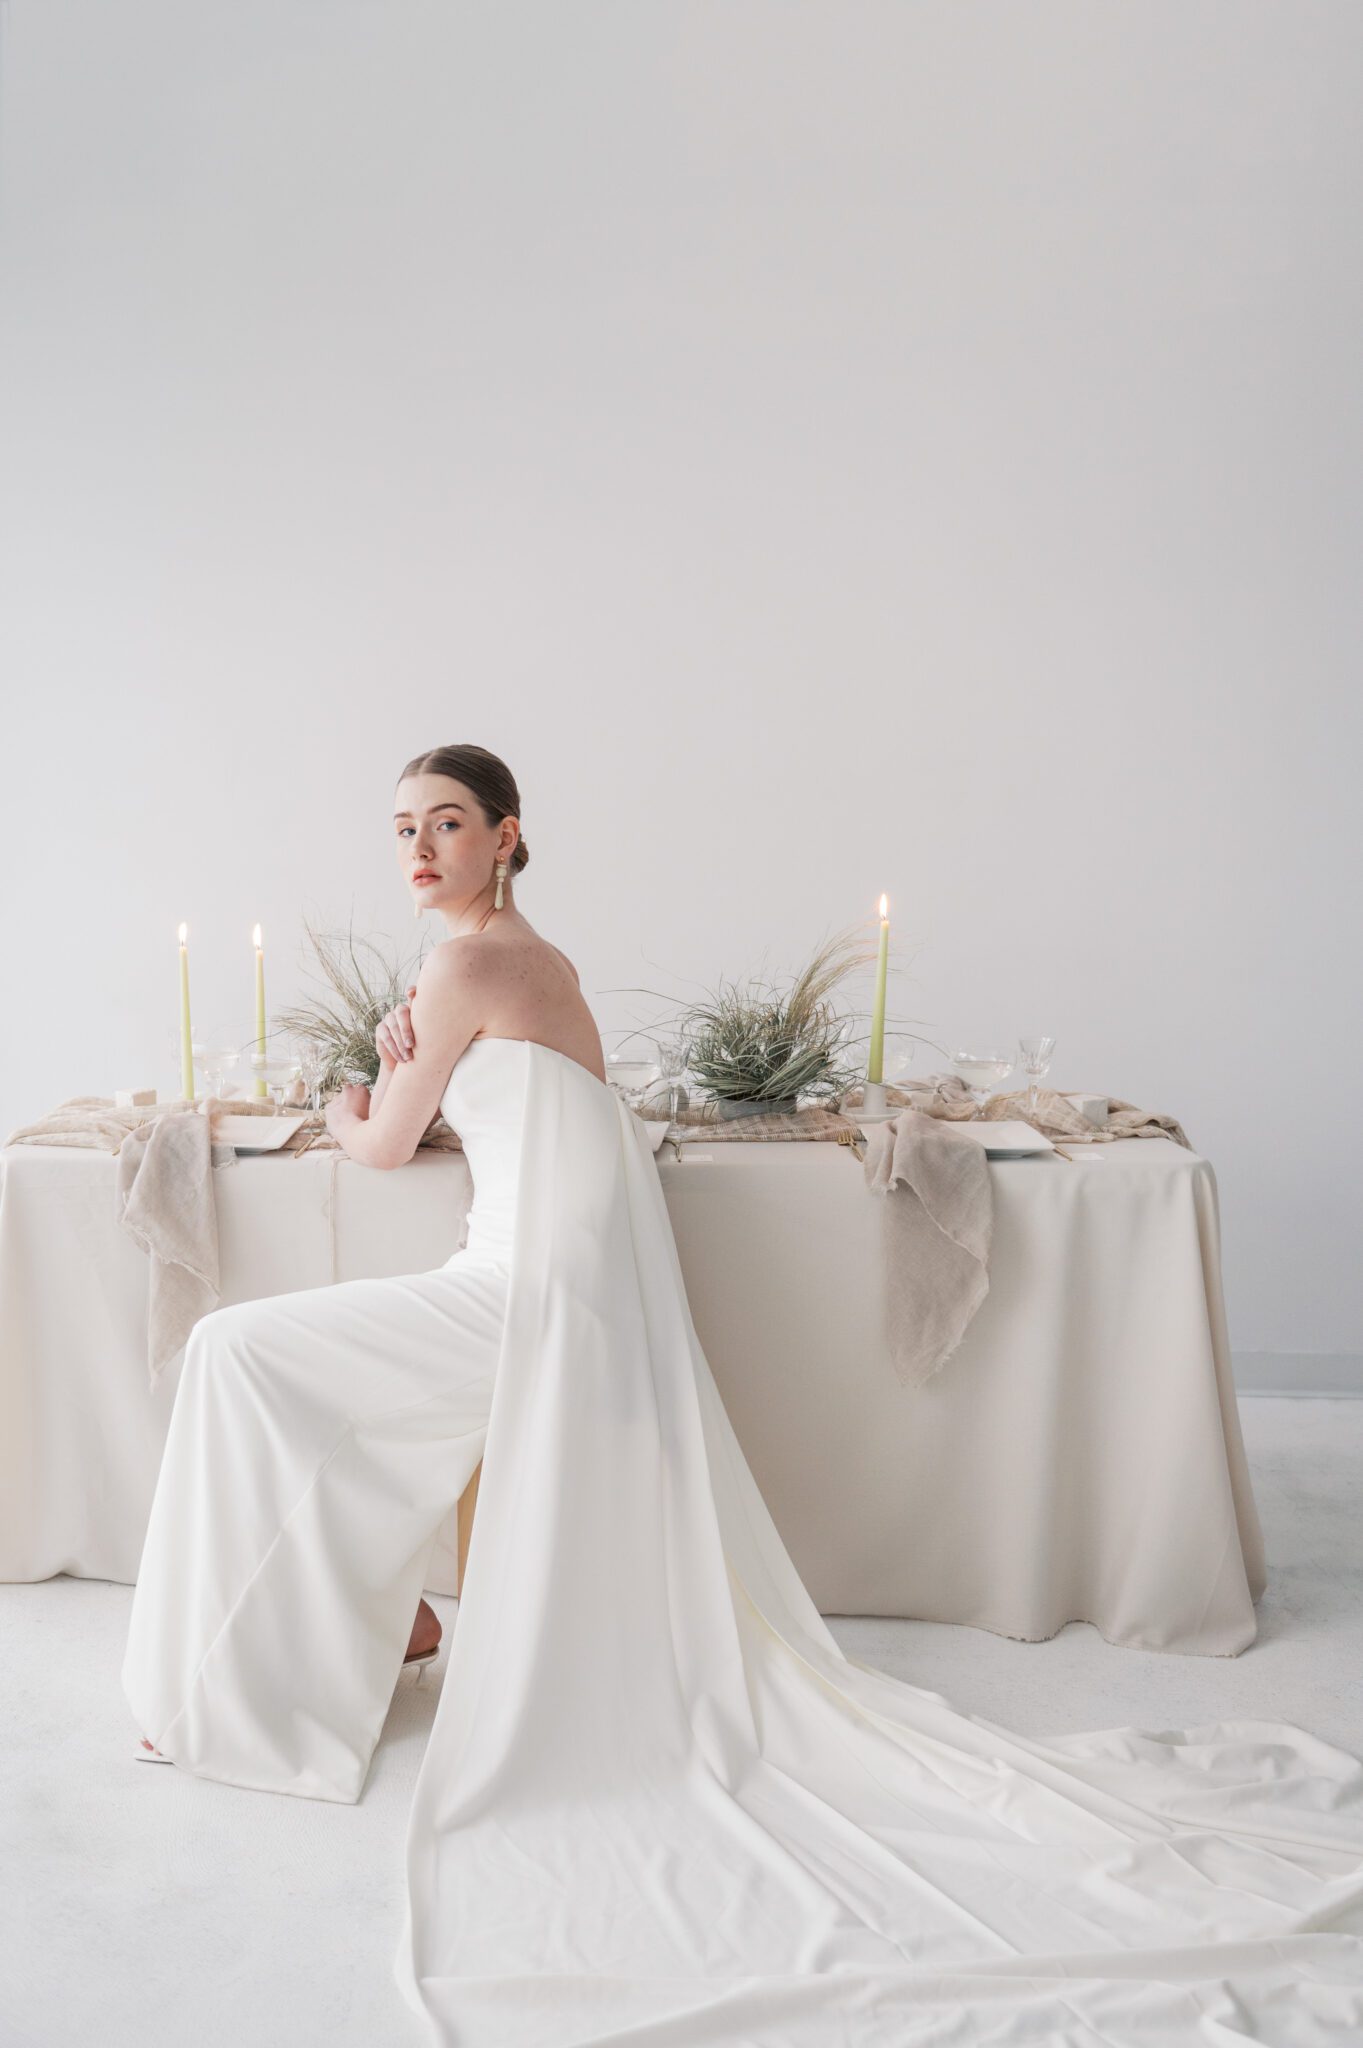 Grecian style wedding gown by Aesling: a fashionable choice for modern brides, artful florals and nature-inspired textures for contemporary weddings